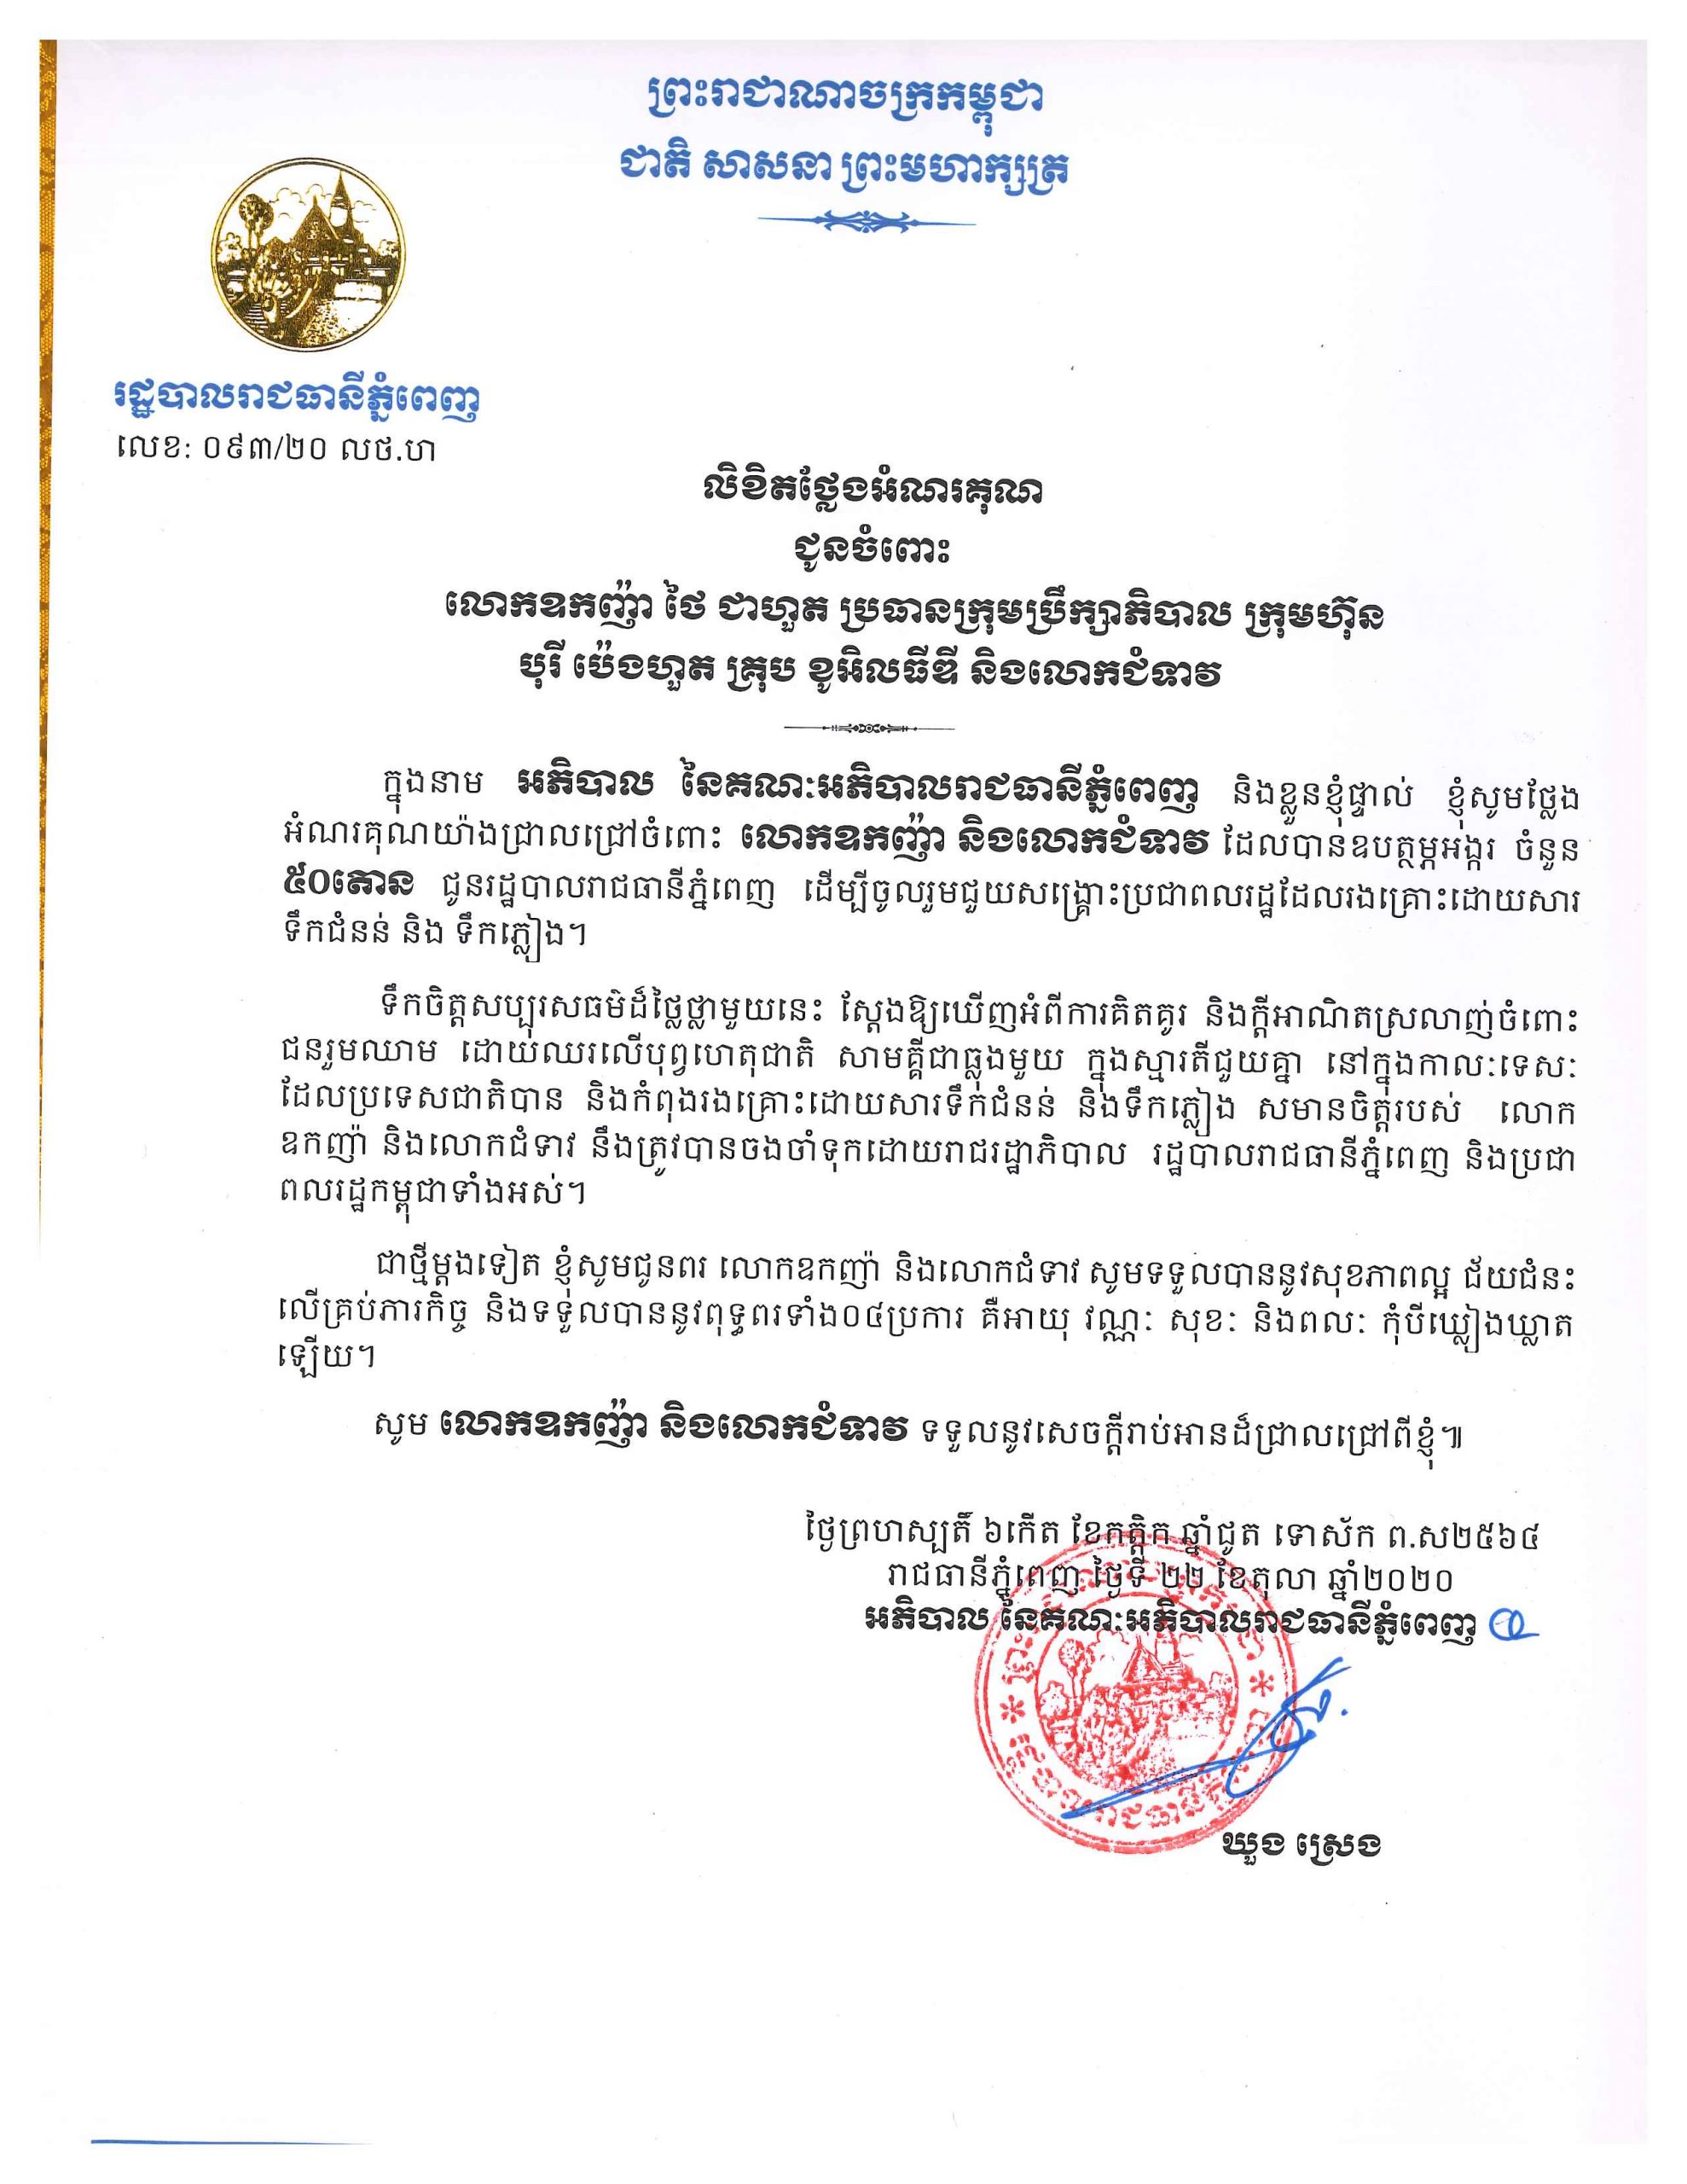 Certificate of Appreciation from Phnom Penh Municiplaity for 50 tons of rice donation for flood victims